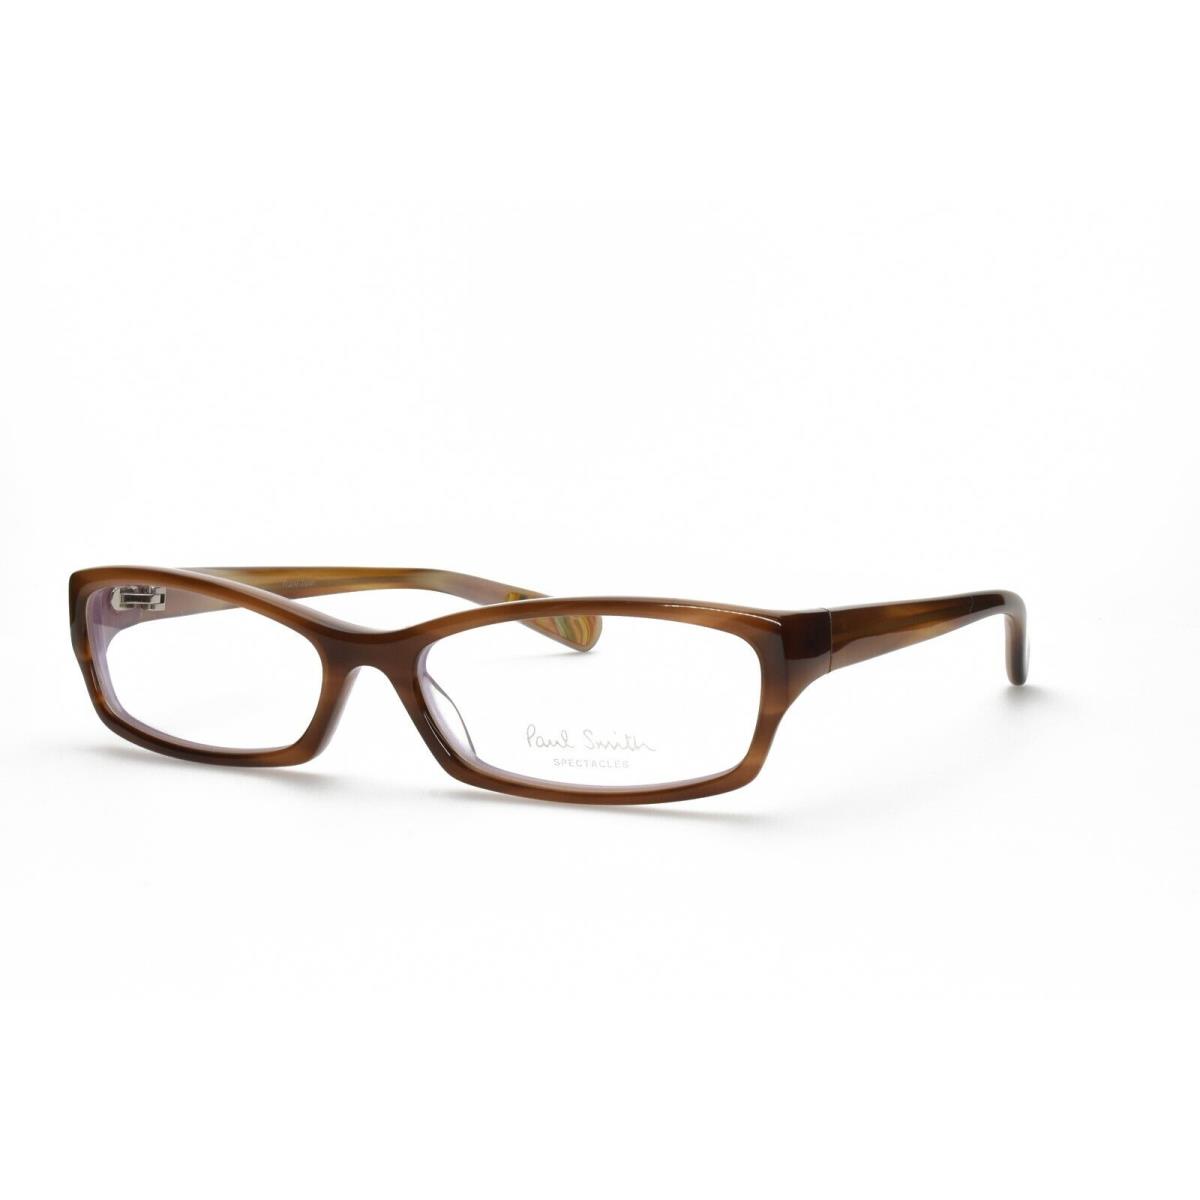 Paul Smith PS 298 Syclv Eyeglasses Frames Only 55-16-130